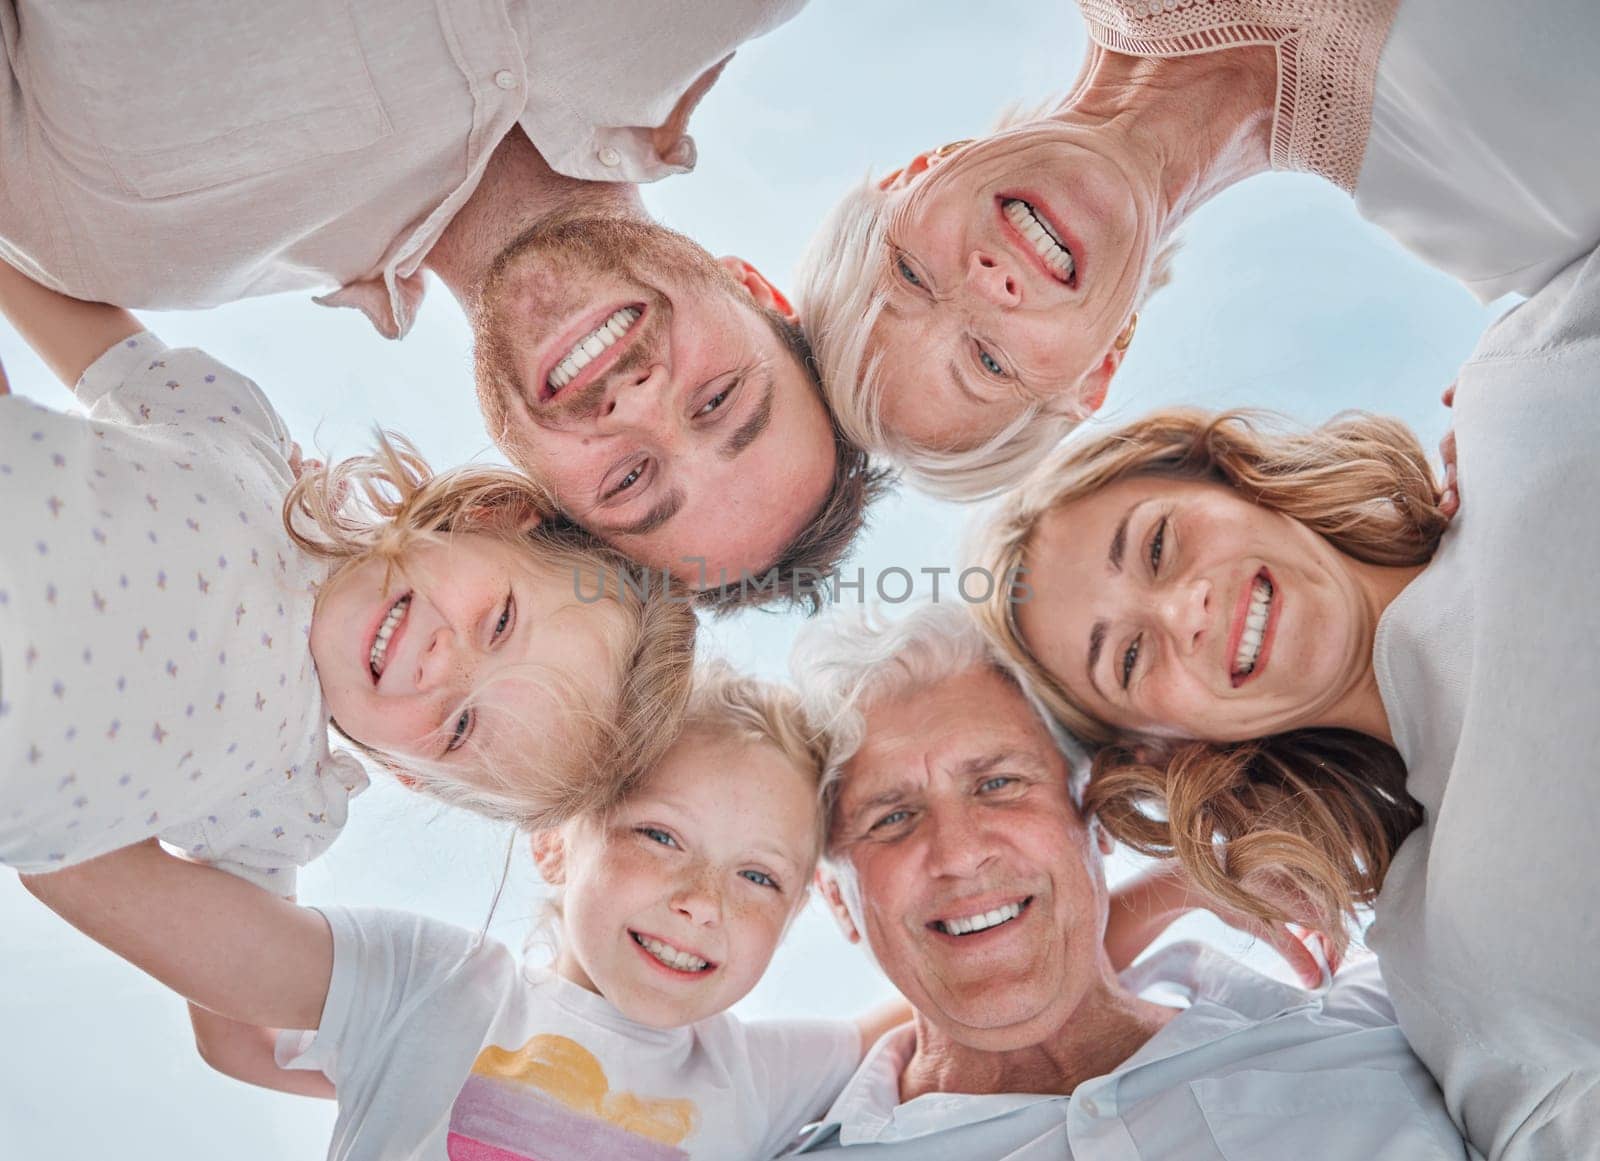 Happy family, portrait and huddle for bonding together, parents and kids with pov, blue sky and outdoor. Holiday, carefree and grandparents with smile, childhood memories and cheerful for vacation.